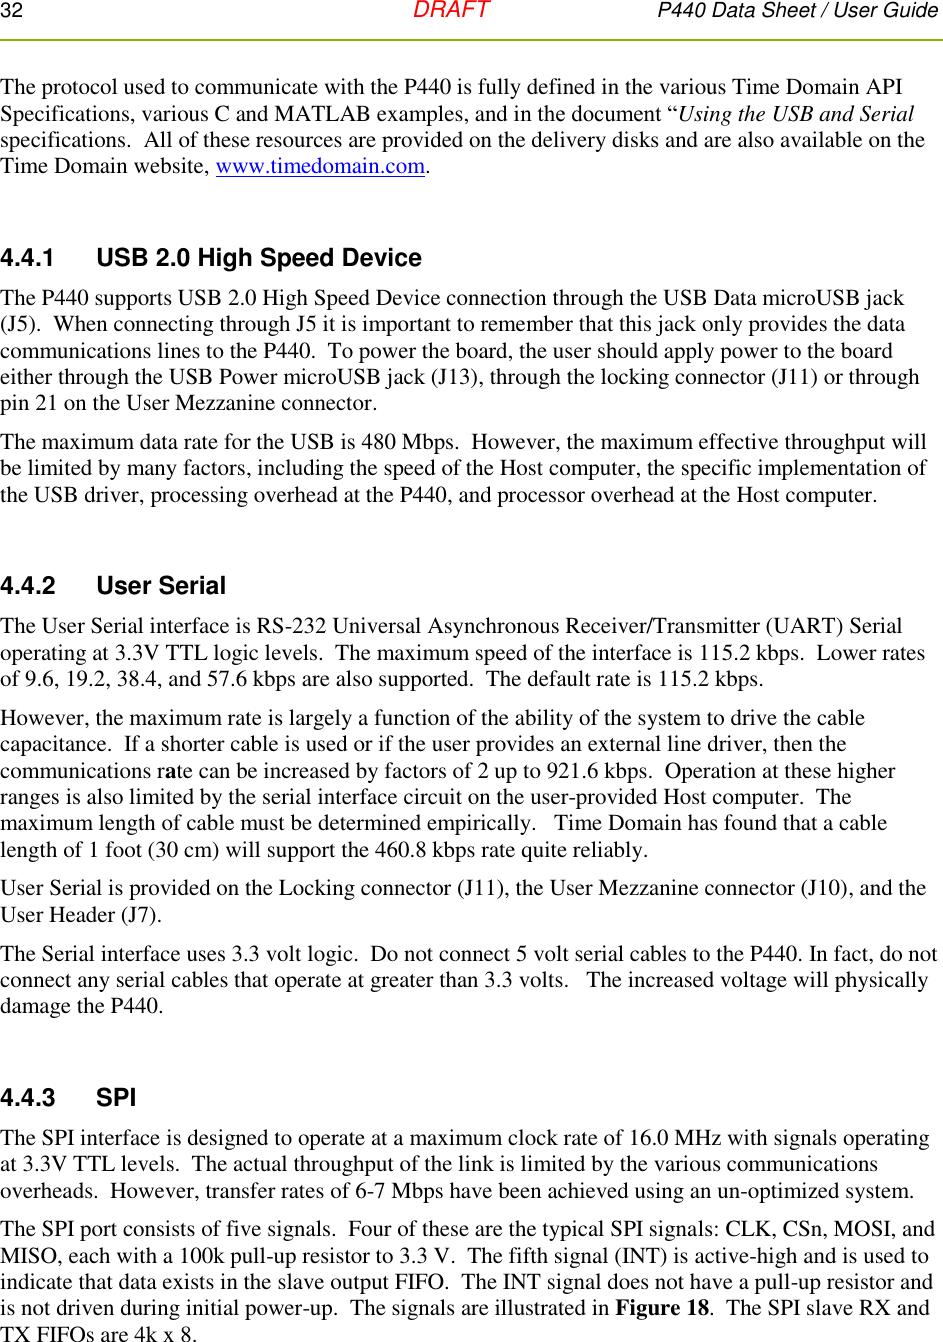 32   DRAFT P440 Data Sheet / User Guide  The protocol used to communicate with the P440 is fully defined in the various Time Domain API Specifications, various C and MATLAB examples, and in the document “Using the USB and Serial specifications.  All of these resources are provided on the delivery disks and are also available on the Time Domain website, www.timedomain.com.    4.4.1     USB 2.0 High Speed Device The P440 supports USB 2.0 High Speed Device connection through the USB Data microUSB jack (J5).  When connecting through J5 it is important to remember that this jack only provides the data communications lines to the P440.  To power the board, the user should apply power to the board either through the USB Power microUSB jack (J13), through the locking connector (J11) or through pin 21 on the User Mezzanine connector. The maximum data rate for the USB is 480 Mbps.  However, the maximum effective throughput will be limited by many factors, including the speed of the Host computer, the specific implementation of the USB driver, processing overhead at the P440, and processor overhead at the Host computer.  4.4.2     User Serial The User Serial interface is RS-232 Universal Asynchronous Receiver/Transmitter (UART) Serial operating at 3.3V TTL logic levels.  The maximum speed of the interface is 115.2 kbps.  Lower rates of 9.6, 19.2, 38.4, and 57.6 kbps are also supported.  The default rate is 115.2 kbps. However, the maximum rate is largely a function of the ability of the system to drive the cable capacitance.  If a shorter cable is used or if the user provides an external line driver, then the communications rate can be increased by factors of 2 up to 921.6 kbps.  Operation at these higher ranges is also limited by the serial interface circuit on the user-provided Host computer.  The maximum length of cable must be determined empirically.   Time Domain has found that a cable length of 1 foot (30 cm) will support the 460.8 kbps rate quite reliably.   User Serial is provided on the Locking connector (J11), the User Mezzanine connector (J10), and the User Header (J7). The Serial interface uses 3.3 volt logic.  Do not connect 5 volt serial cables to the P440. In fact, do not connect any serial cables that operate at greater than 3.3 volts.   The increased voltage will physically damage the P440.    4.4.3     SPI The SPI interface is designed to operate at a maximum clock rate of 16.0 MHz with signals operating at 3.3V TTL levels.  The actual throughput of the link is limited by the various communications overheads.  However, transfer rates of 6-7 Mbps have been achieved using an un-optimized system. The SPI port consists of five signals.  Four of these are the typical SPI signals: CLK, CSn, MOSI, and MISO, each with a 100k pull-up resistor to 3.3 V.  The fifth signal (INT) is active-high and is used to indicate that data exists in the slave output FIFO.  The INT signal does not have a pull-up resistor and is not driven during initial power-up.  The signals are illustrated in Figure 18.  The SPI slave RX and TX FIFOs are 4k x 8.   